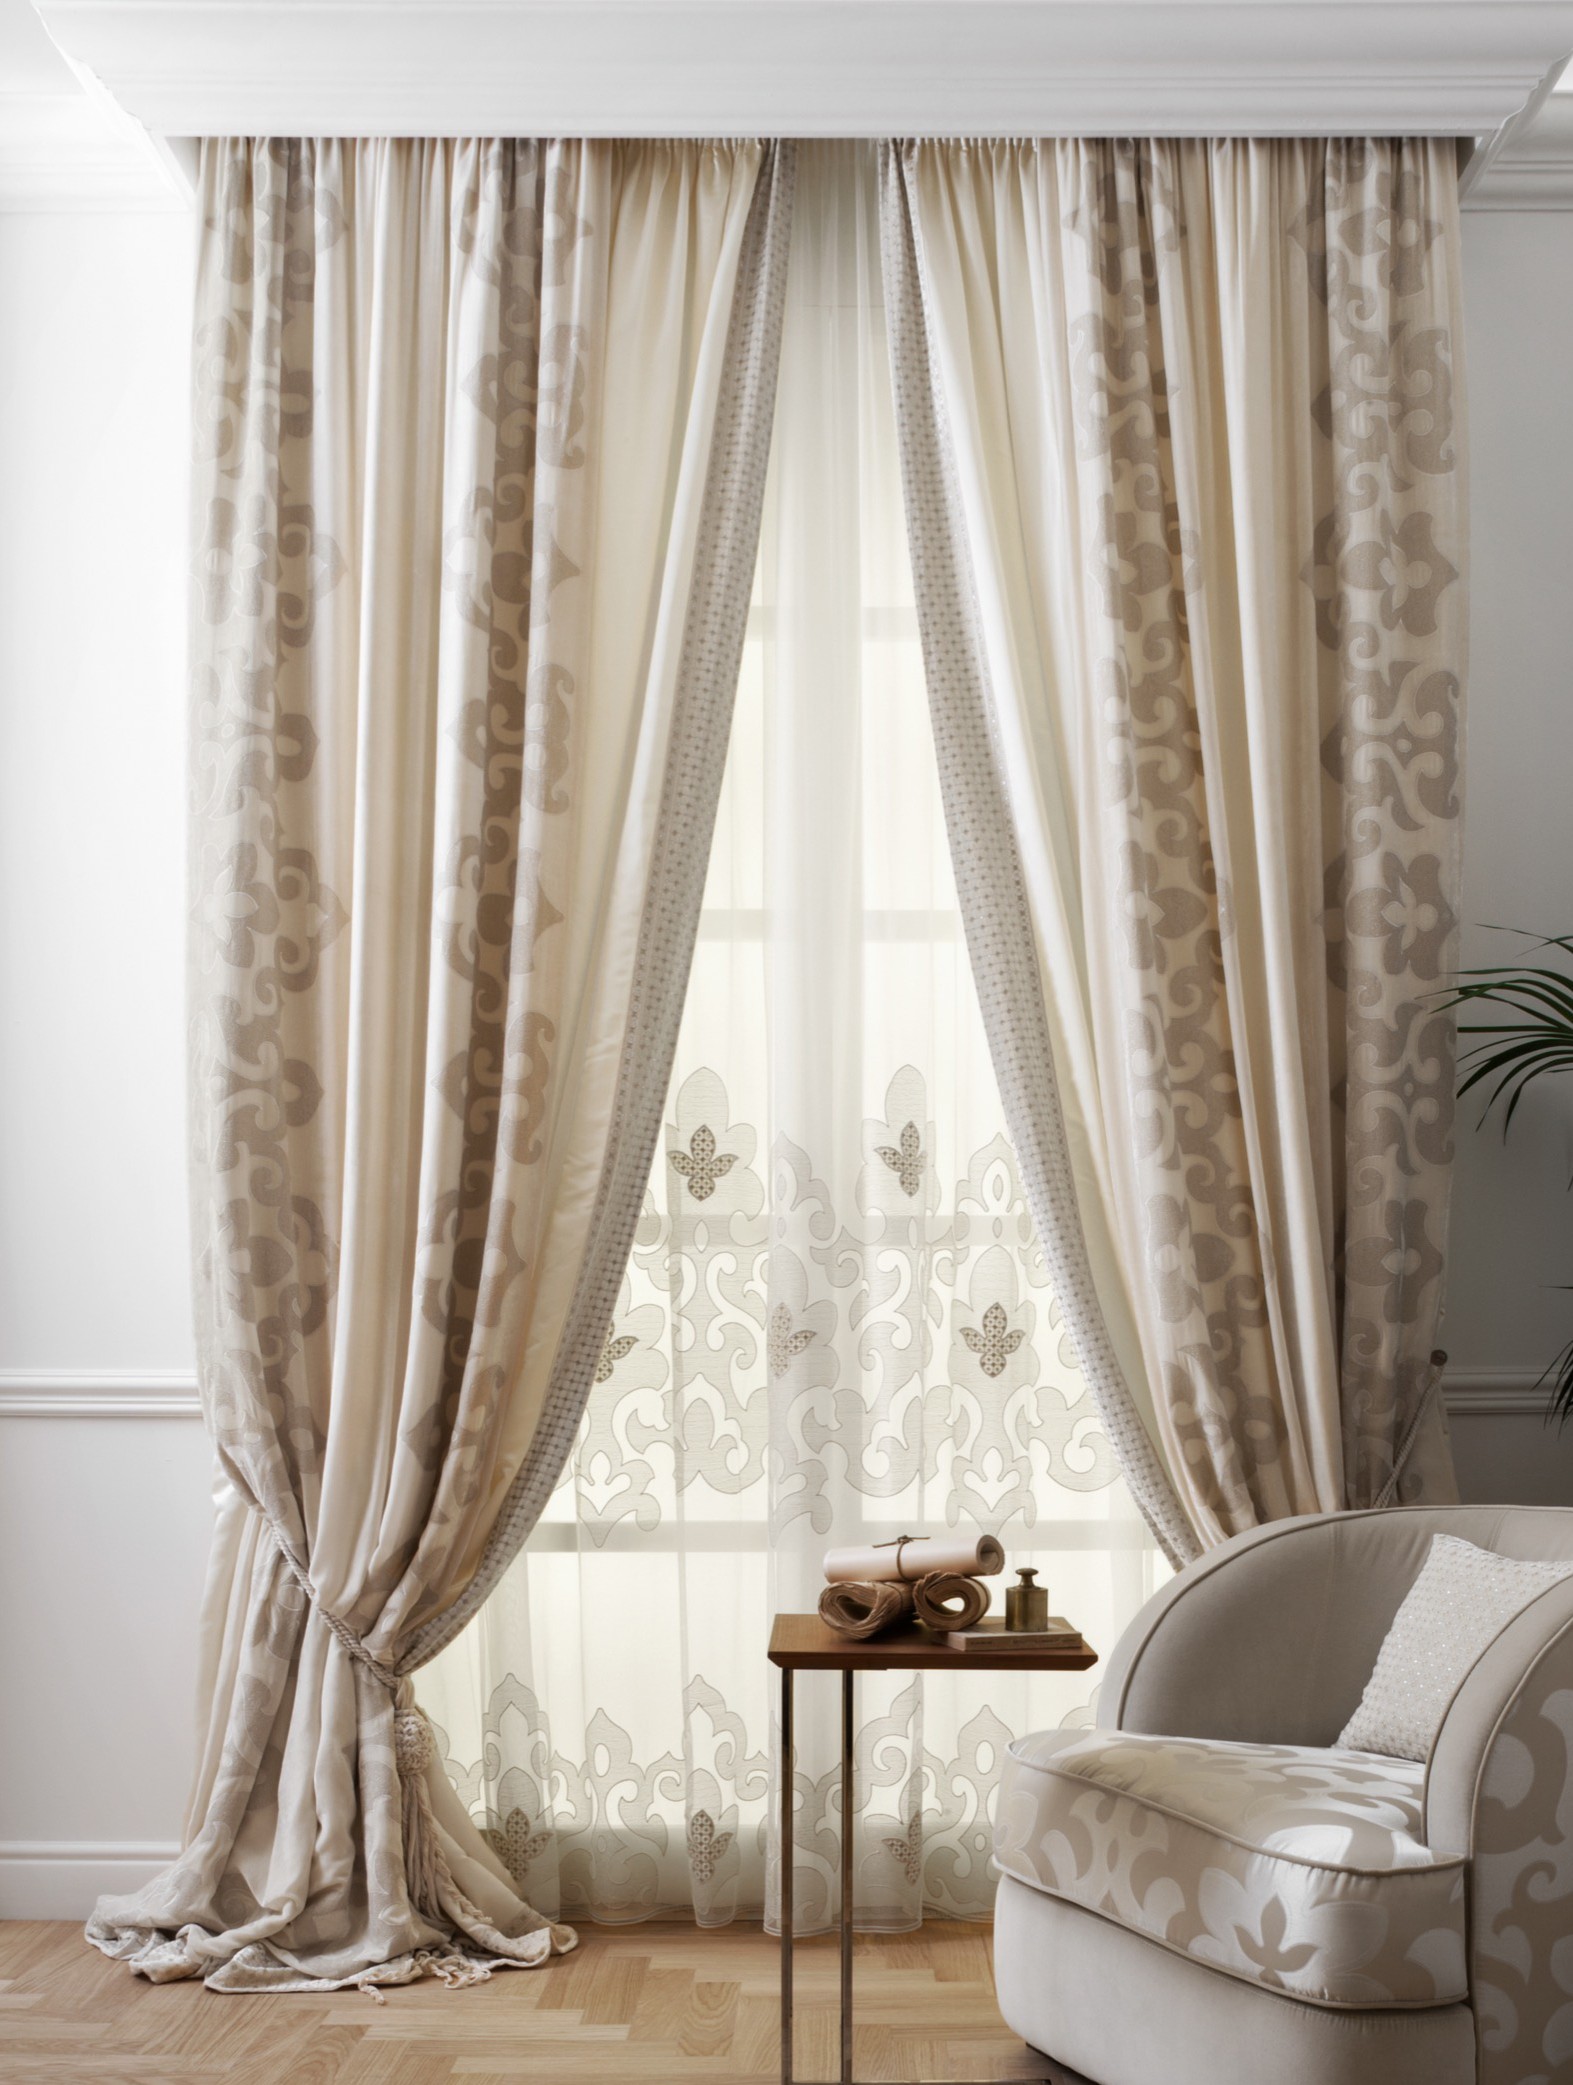 Custom Window Treatments Hand made draperies from our Masterpiece Collection. 25